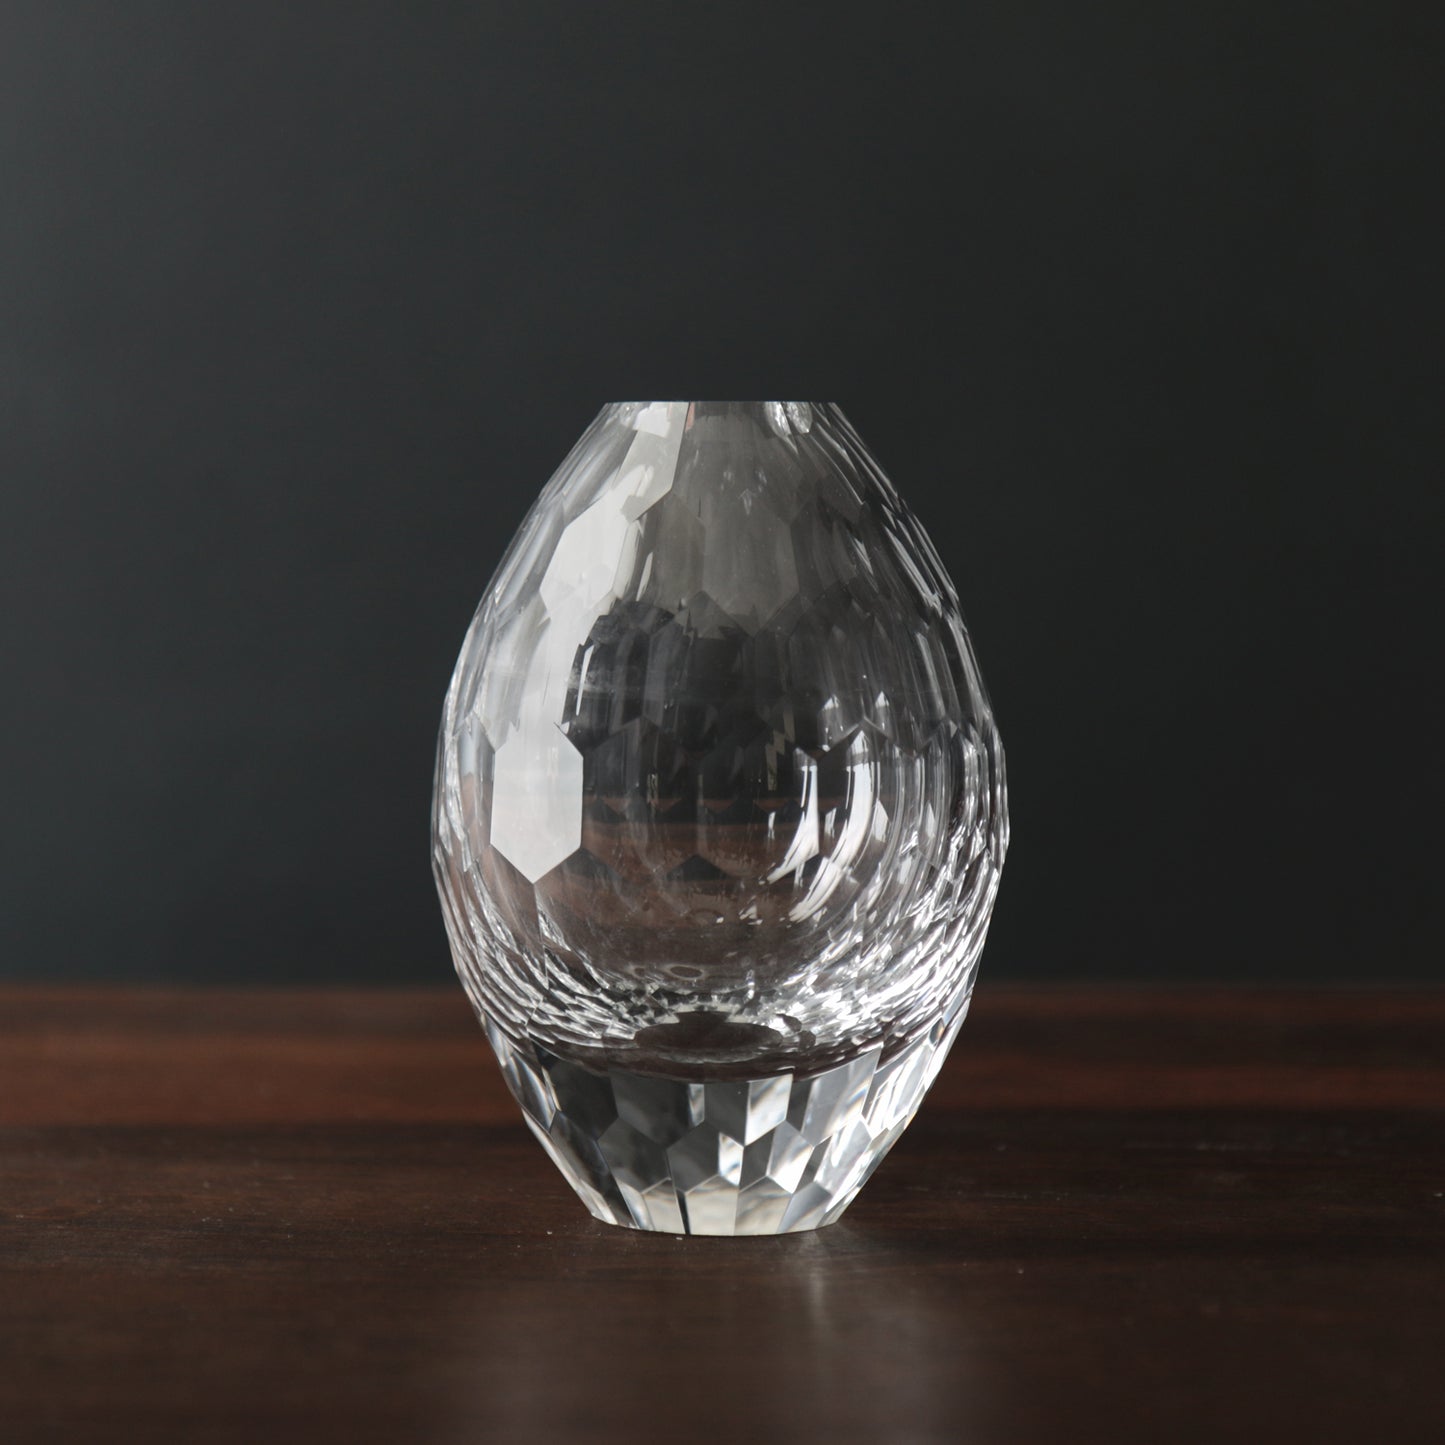 Faceted Clear Glass Teardrop Bud Vase 3.5 x 4.75